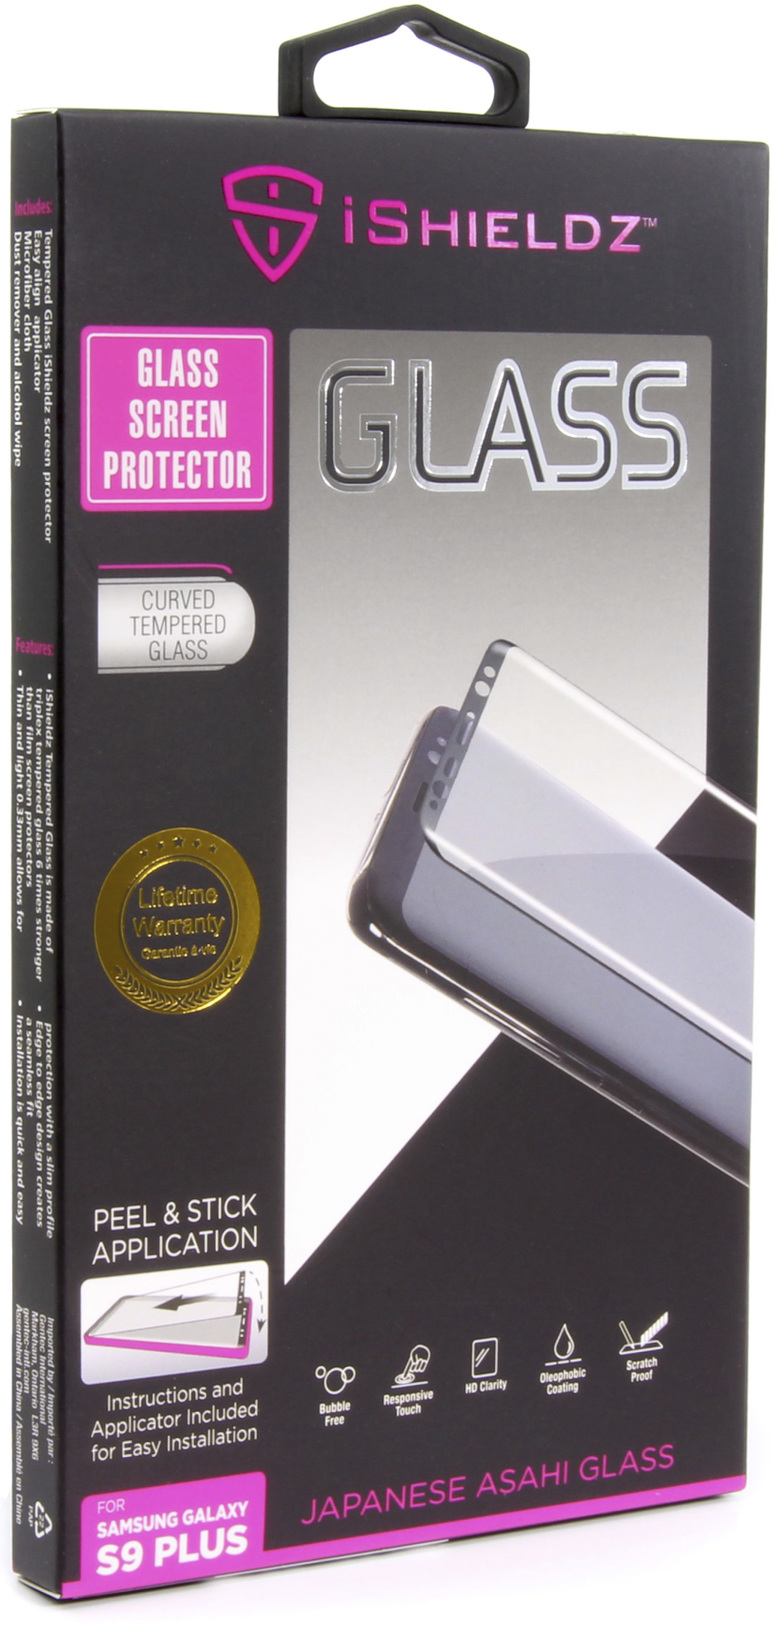 Galaxy S9 Curved Tempered Glass Screen Protector With Applicator